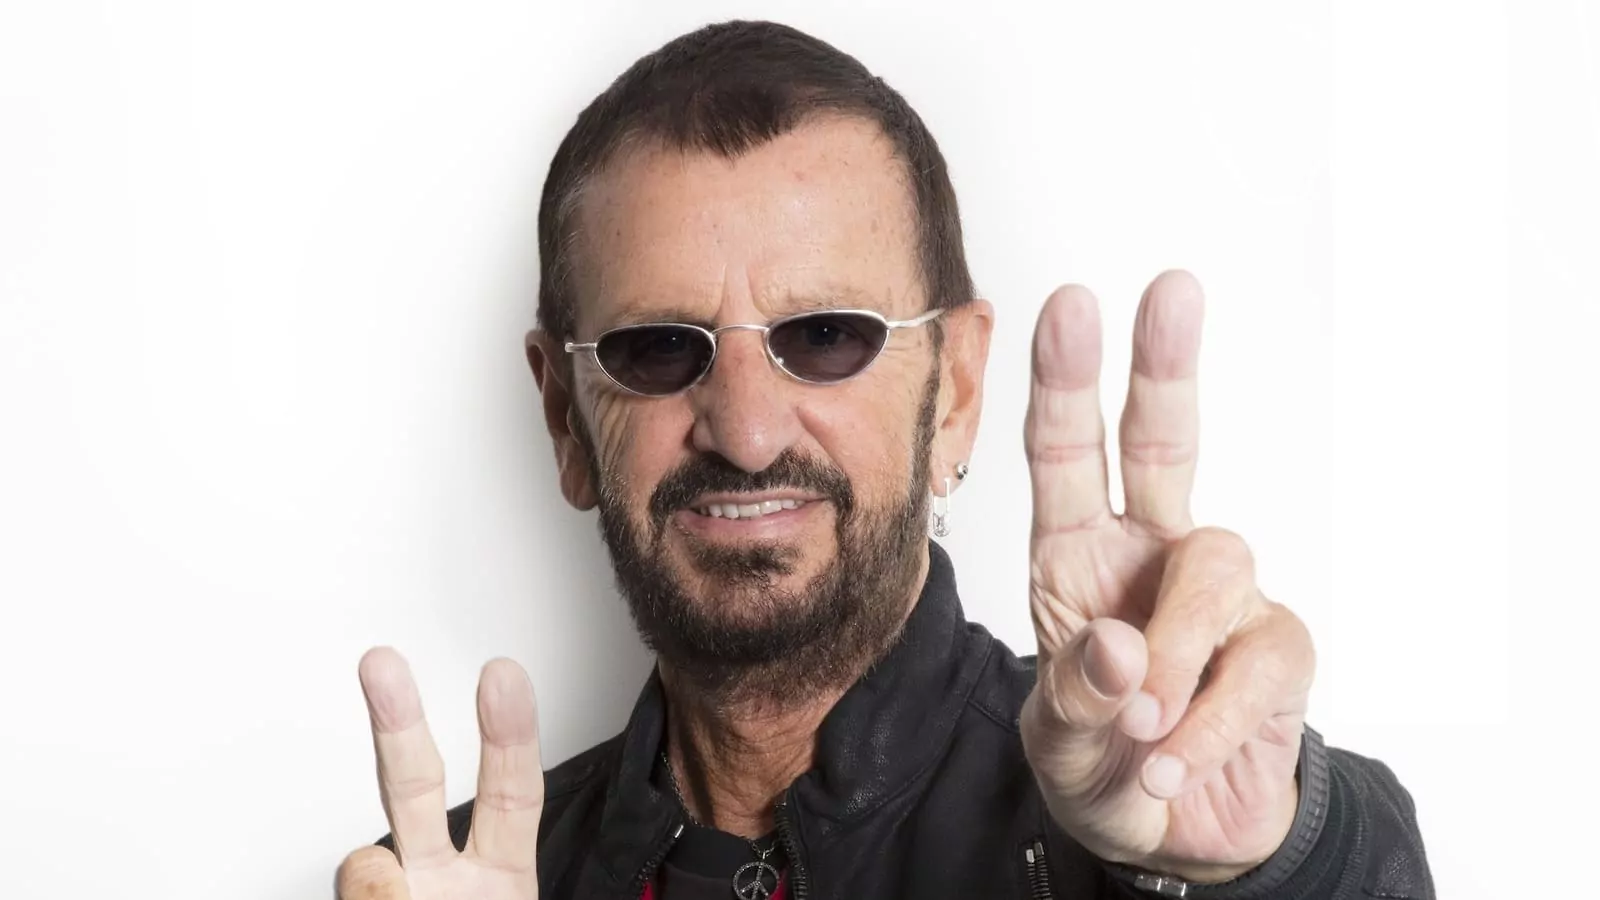 The Top 7 Songs That Ringo Starr Named As His Favorites